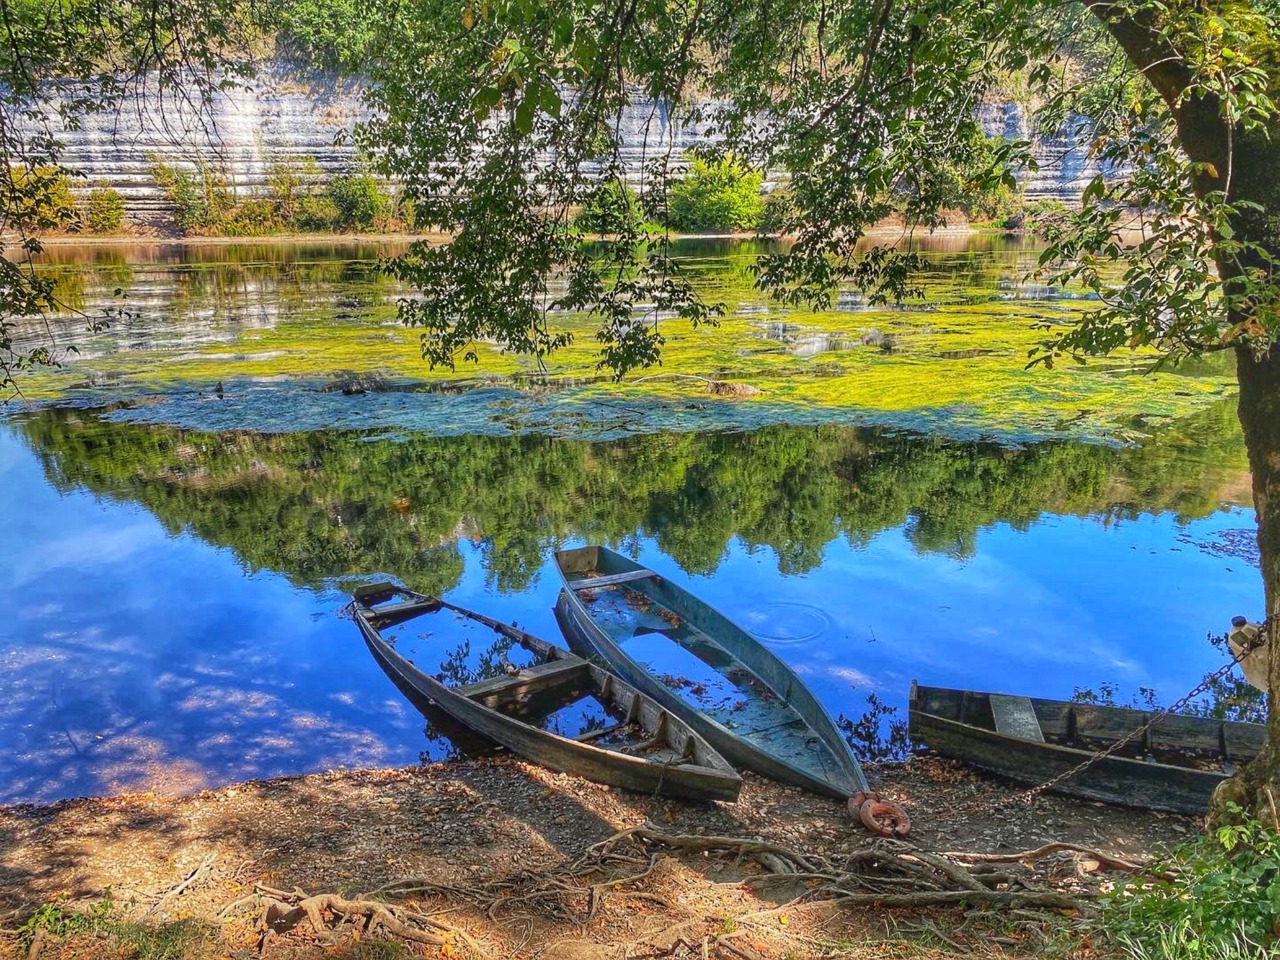 Reflections on the Dordogne River